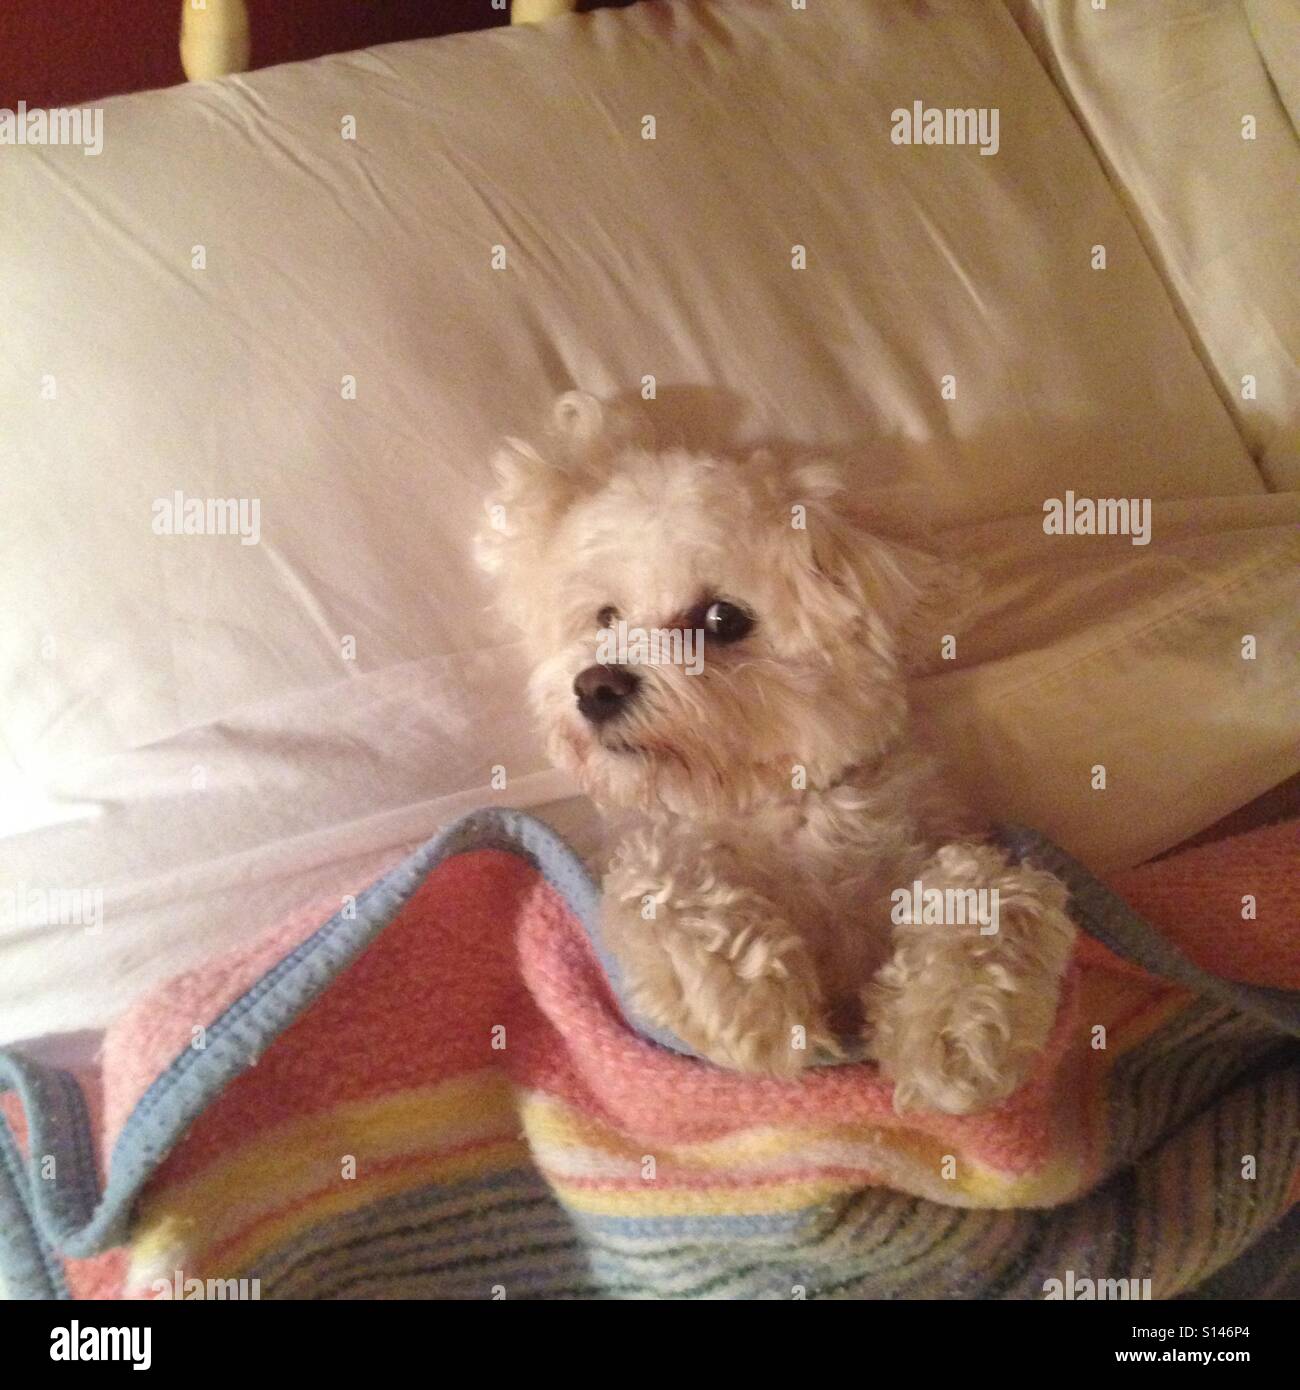 Putter napping in bed. Stock Photo